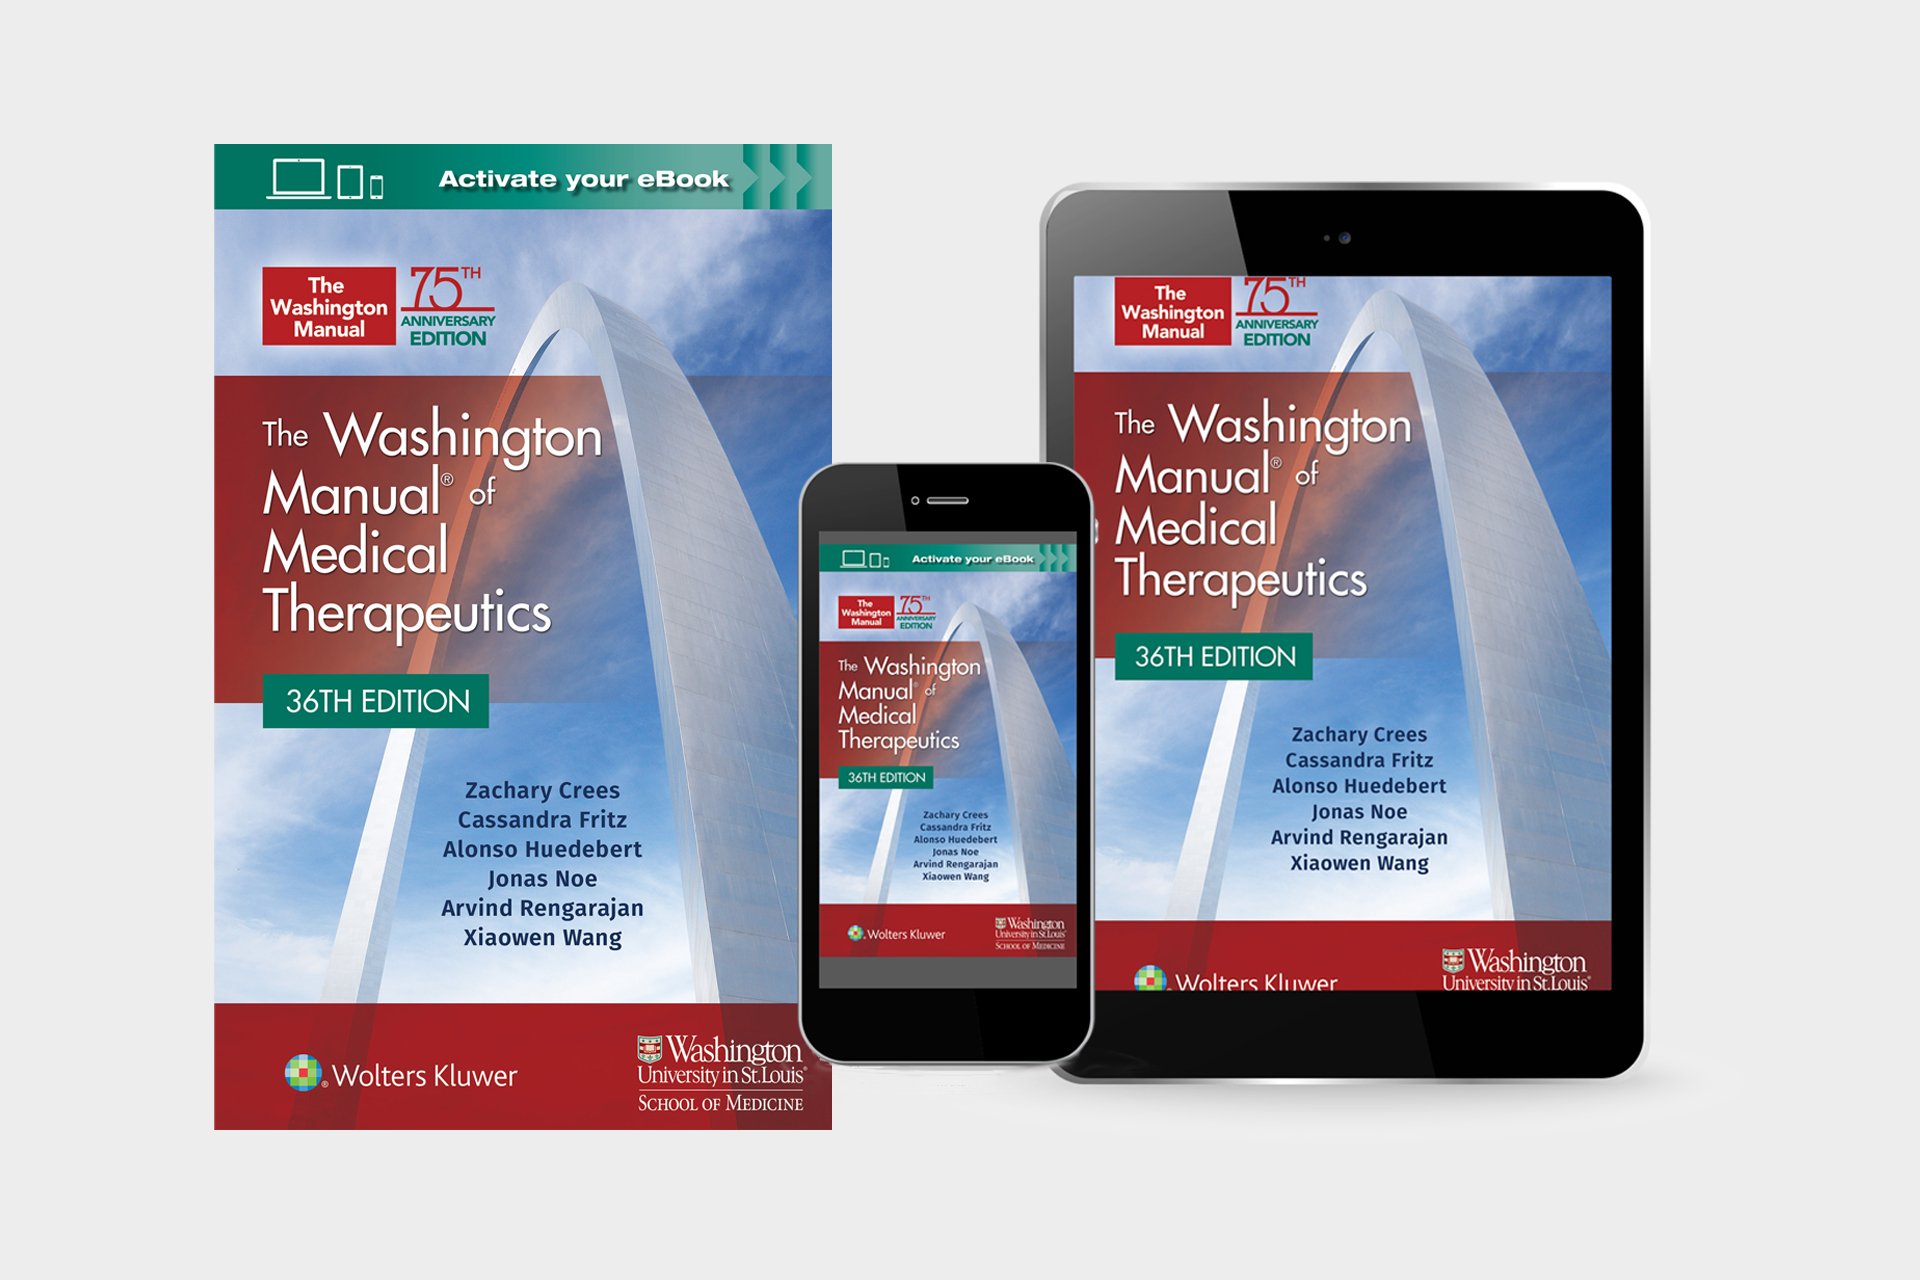 The Washington Manual of Medical Therapeutics book cover shown in print, on mobile, and on tablet